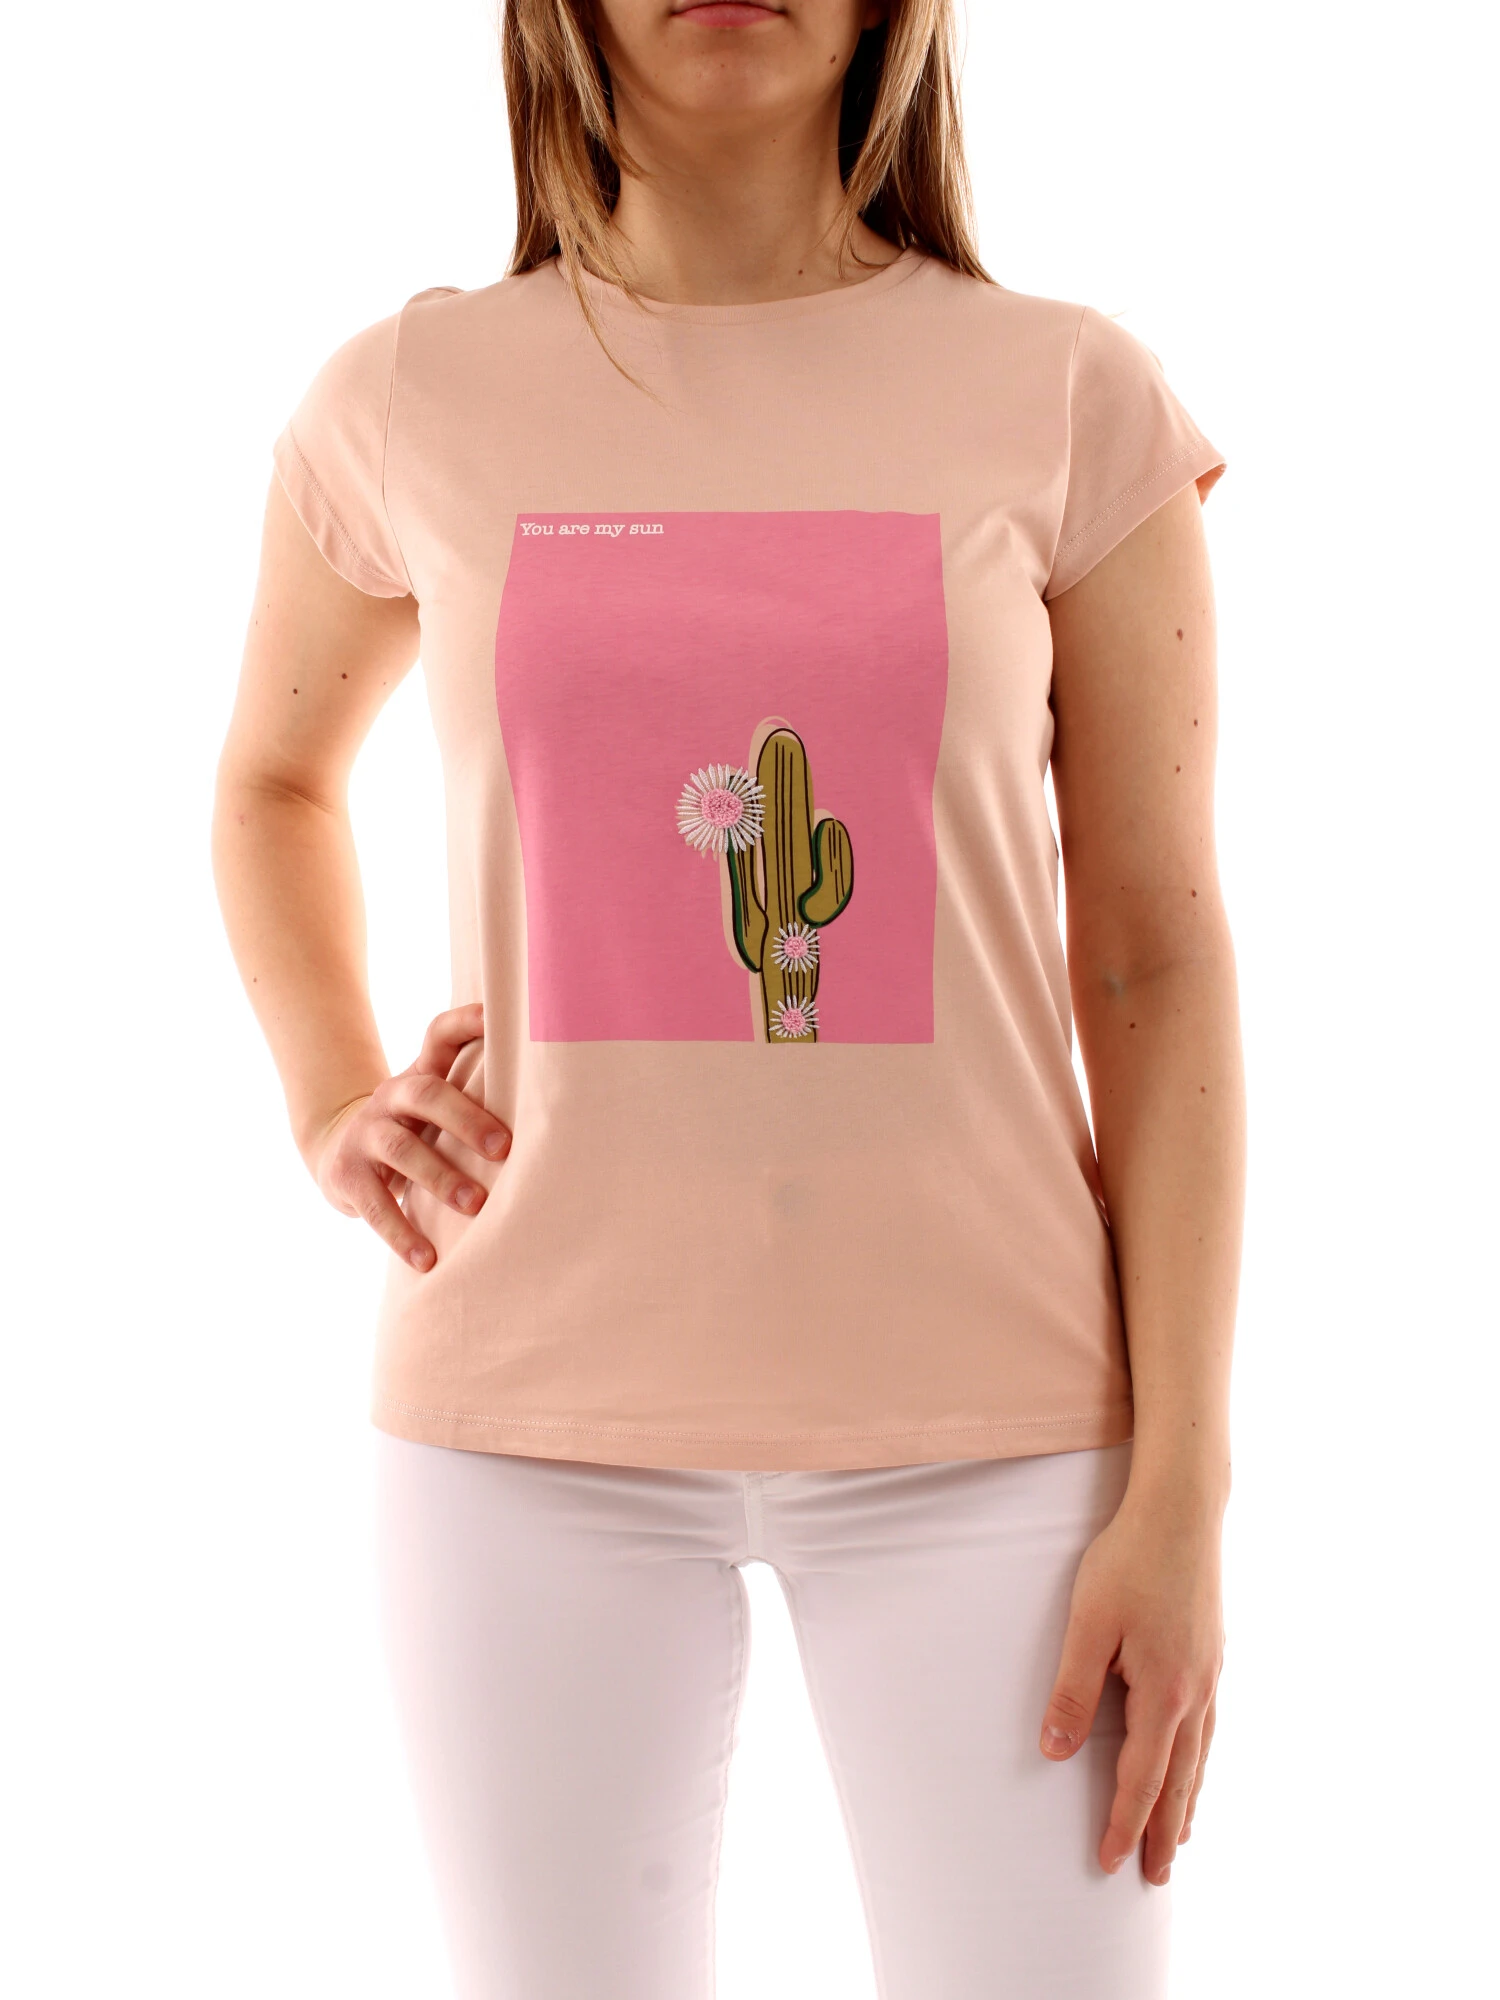 T-SHIRT CON STAMPA CACTUS DONNA ROSA